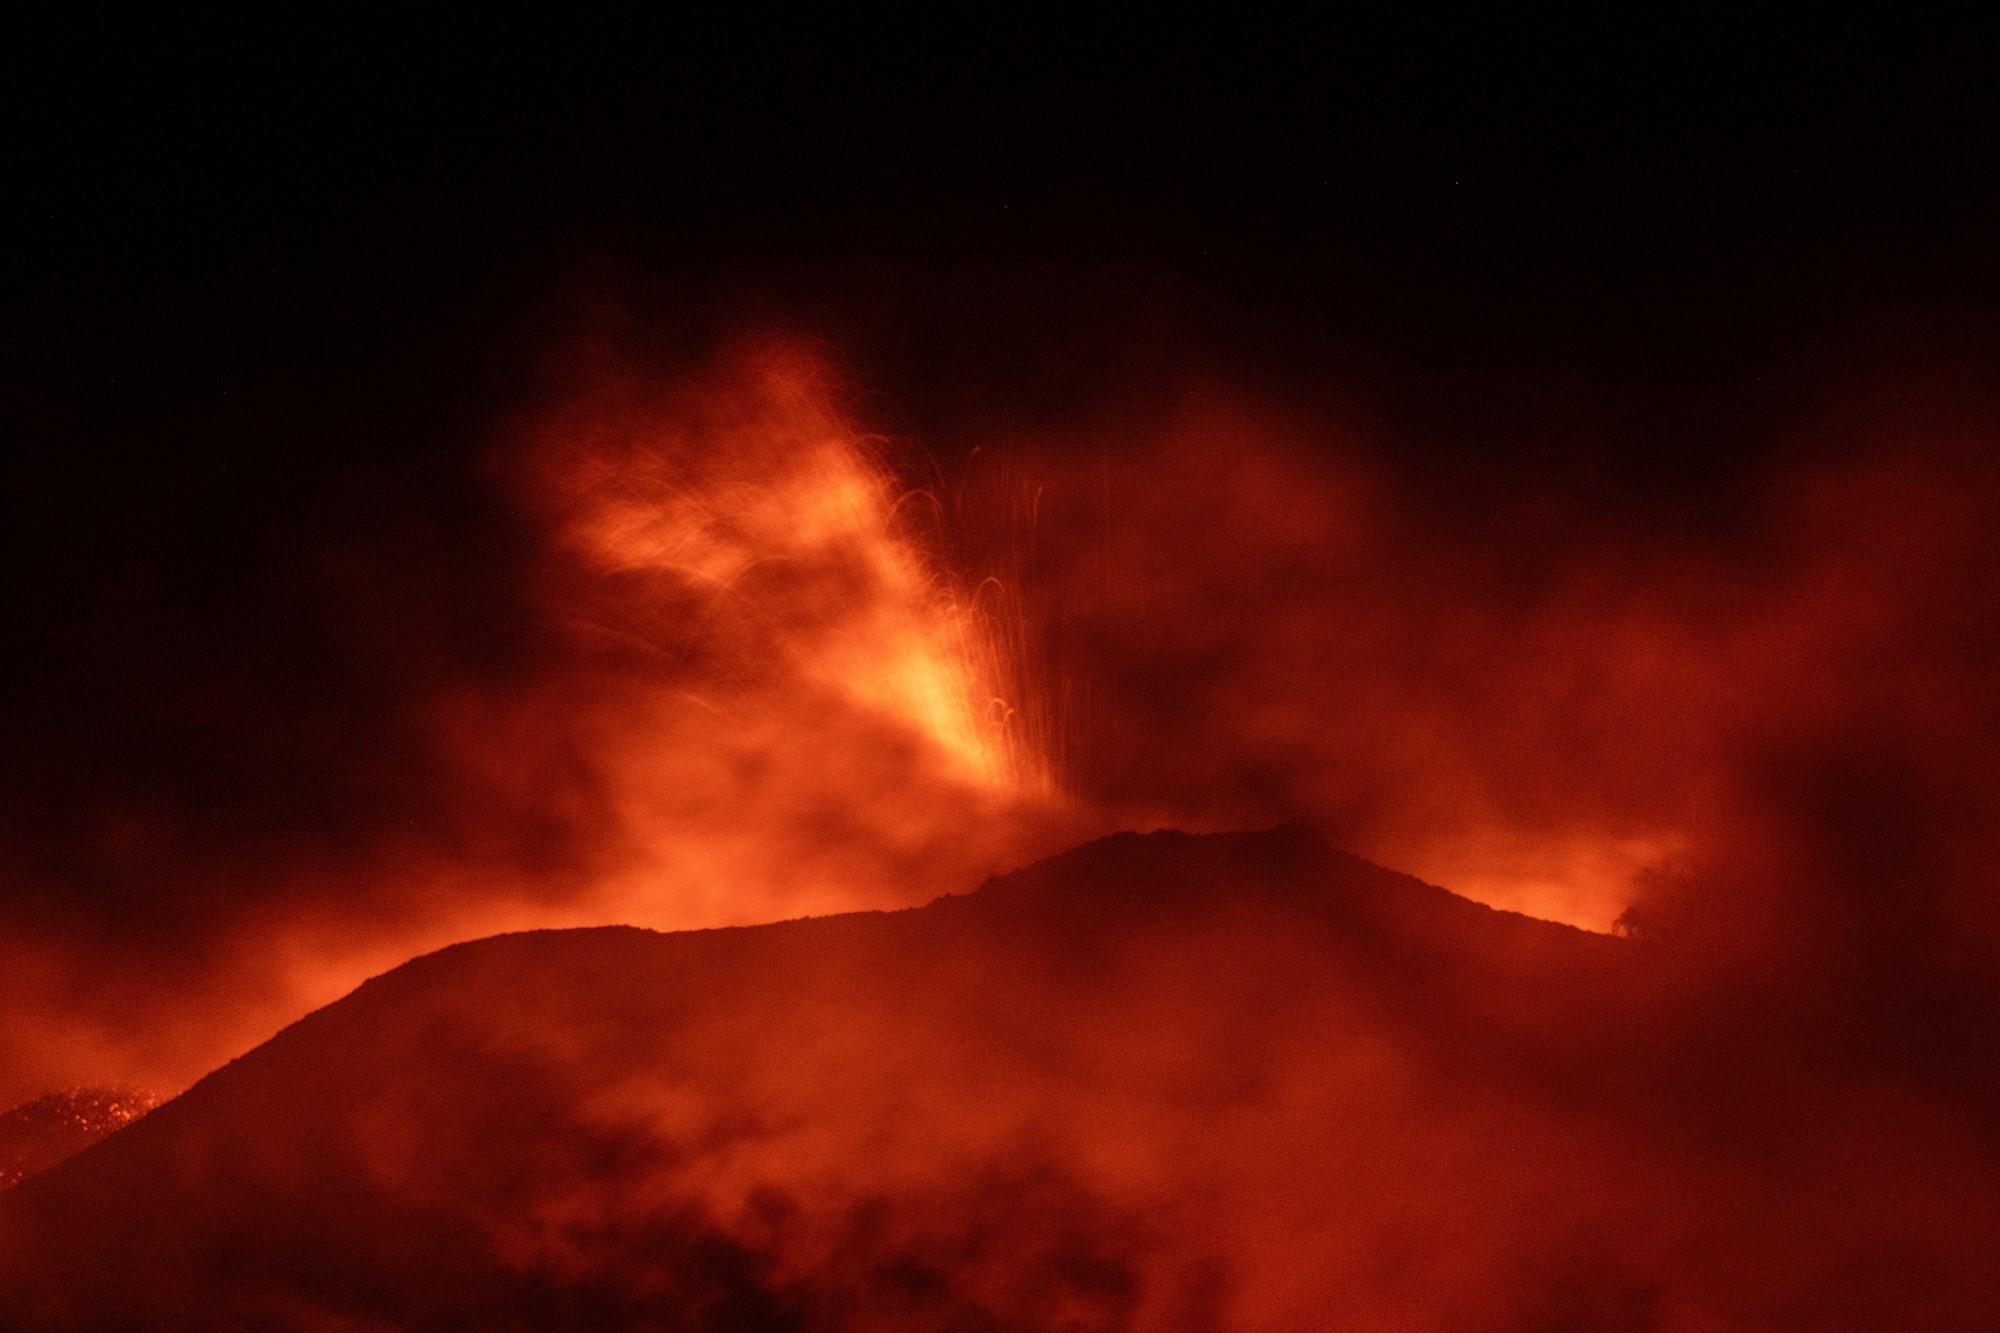 Red fire and ash coming out of a volcano